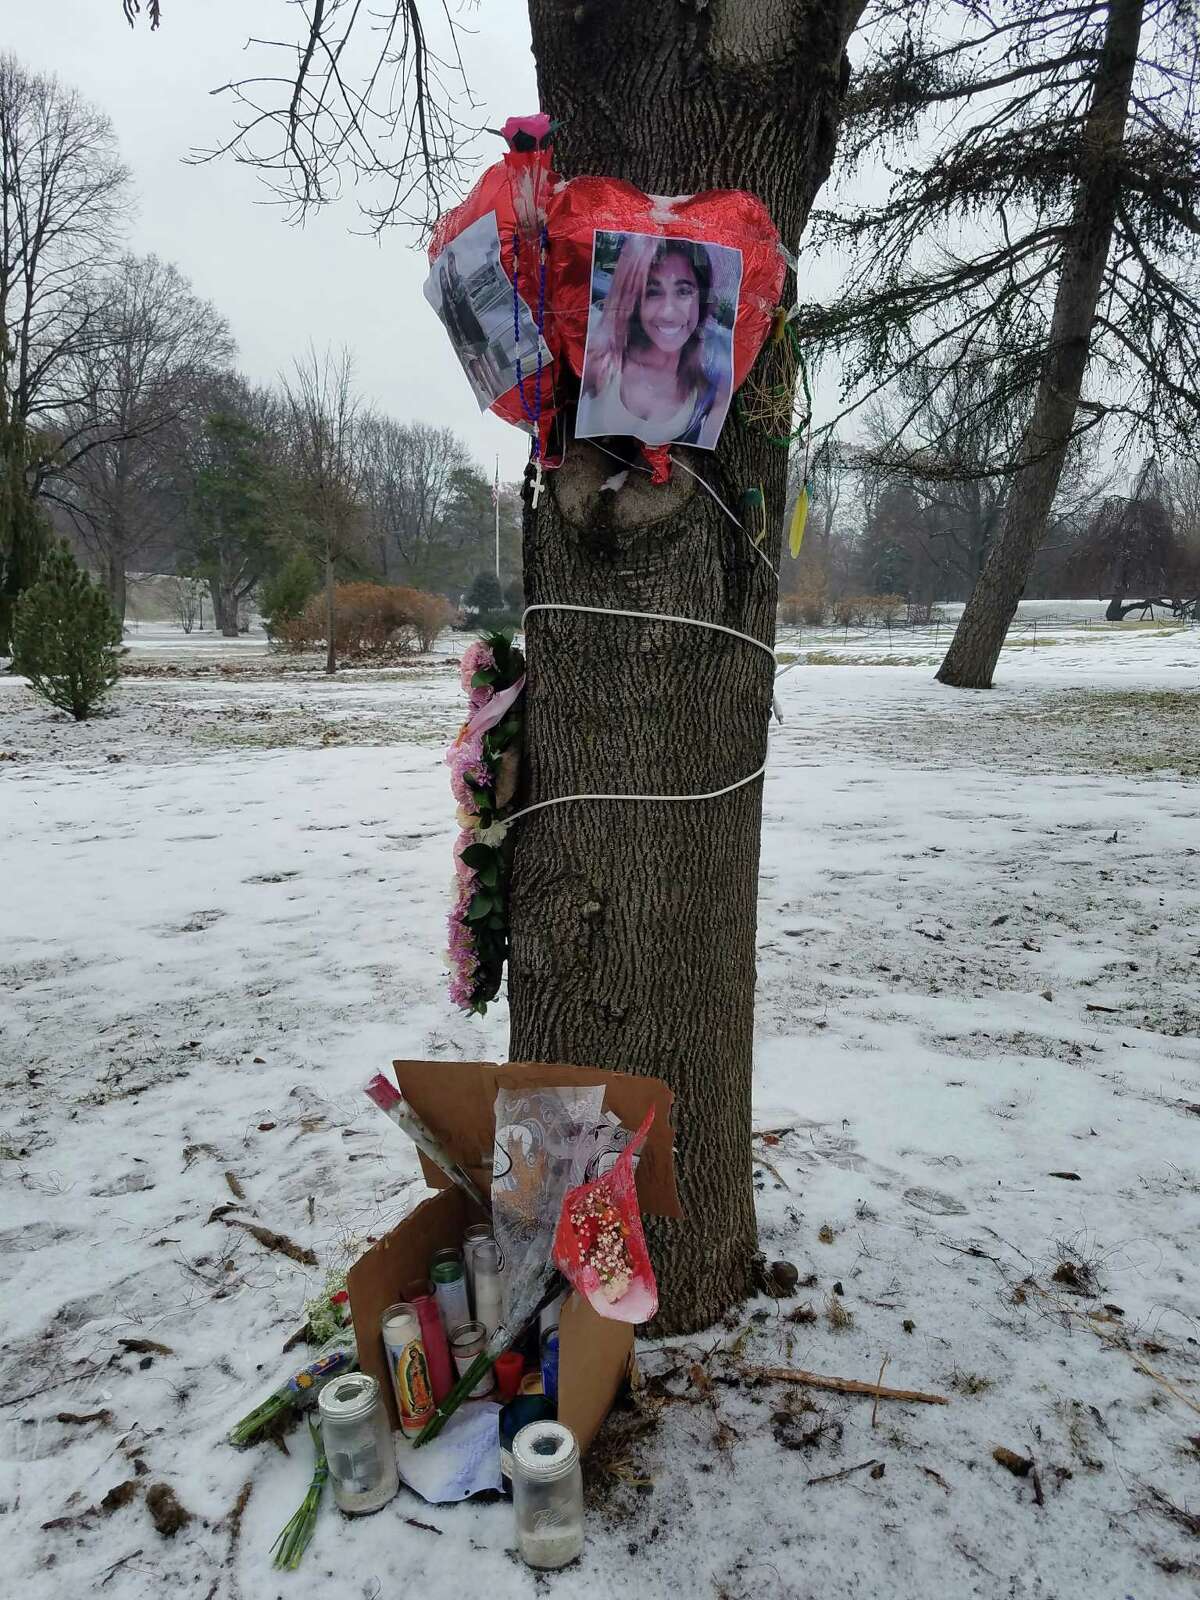 A memorial in Washington Park in Albany marks where Rajine Martinez, 21, was killed in a hit-and-run crash on Feb. 4, 2017. The circumstances of the death are unclear, but many who use the park have long been concerned about speeding traffic. (Chris Churchill / Times Union)